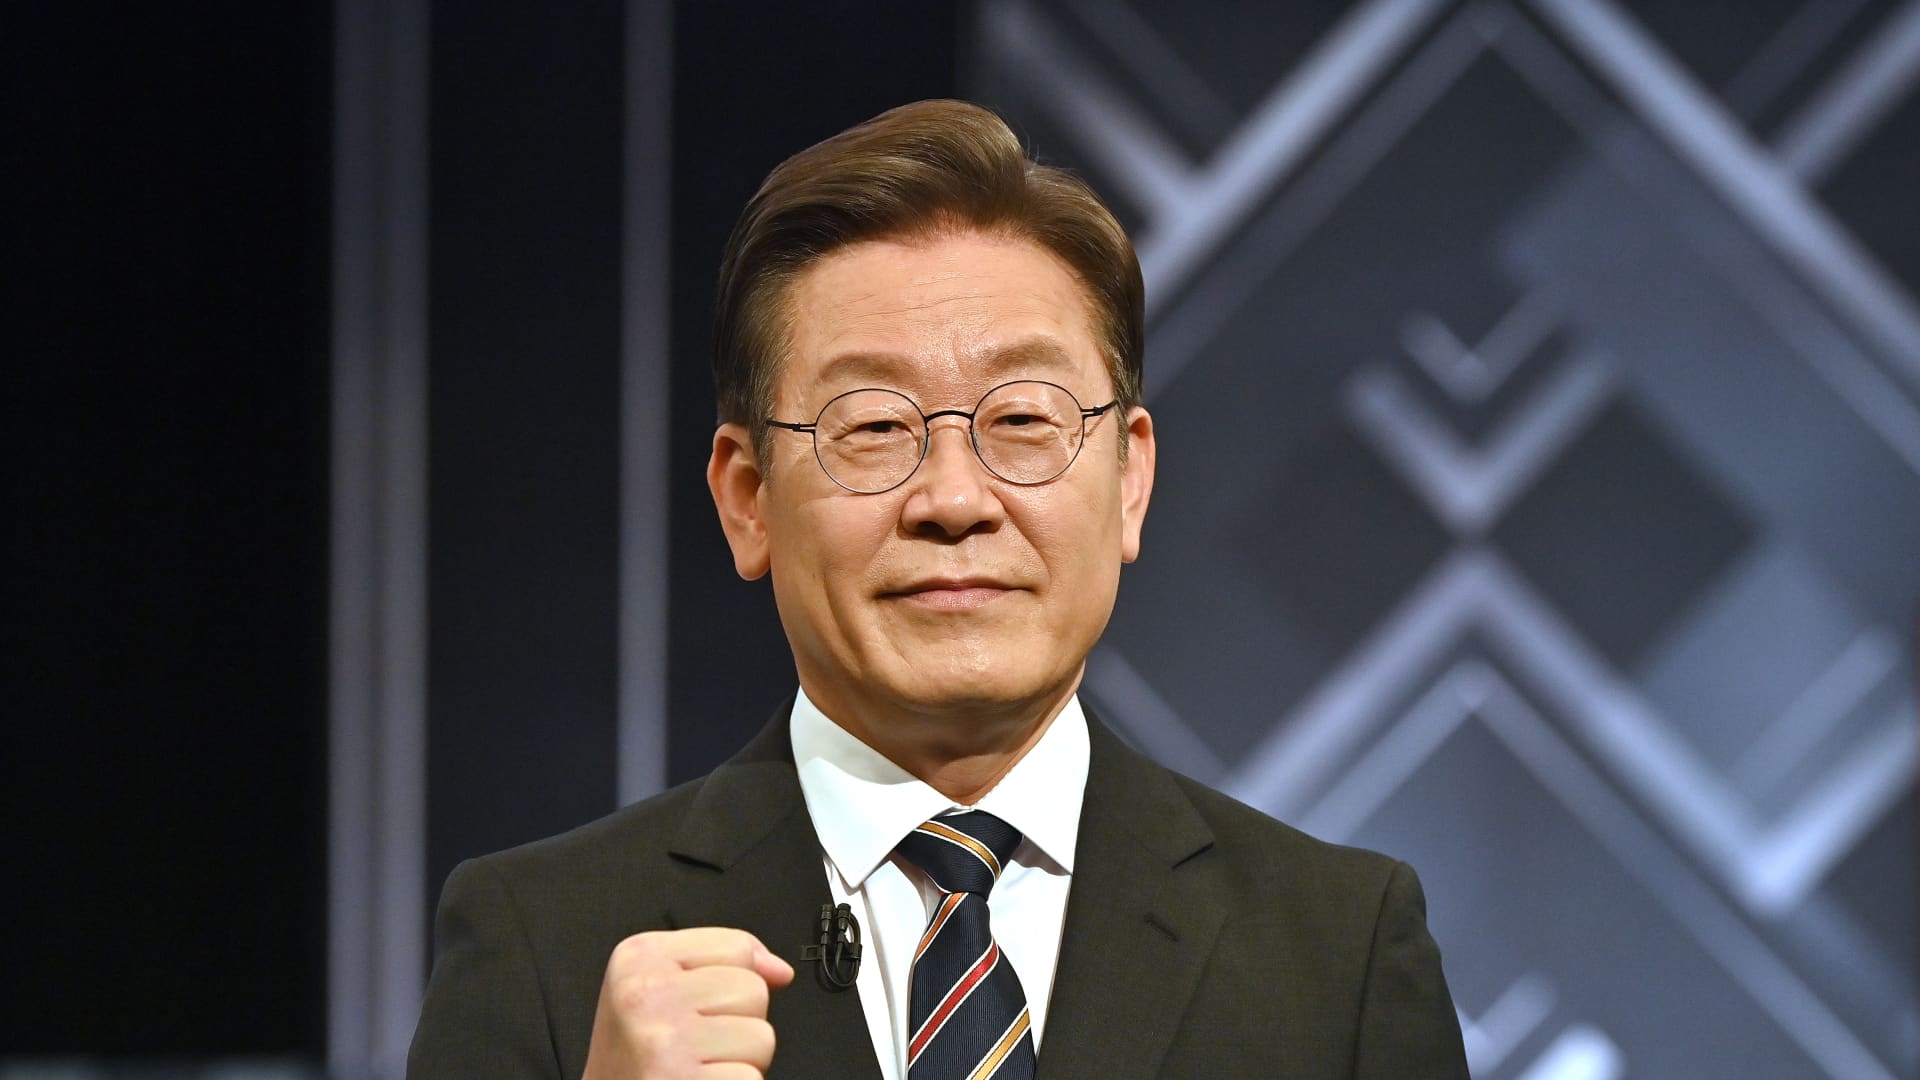 South Korean presidential candidate Lee Jae-myung of the ruling Democratic Party looks on before televised presidential debate for the upcoming March 9 presidential election at KBS studio on March 02, 2022, in Seoul.